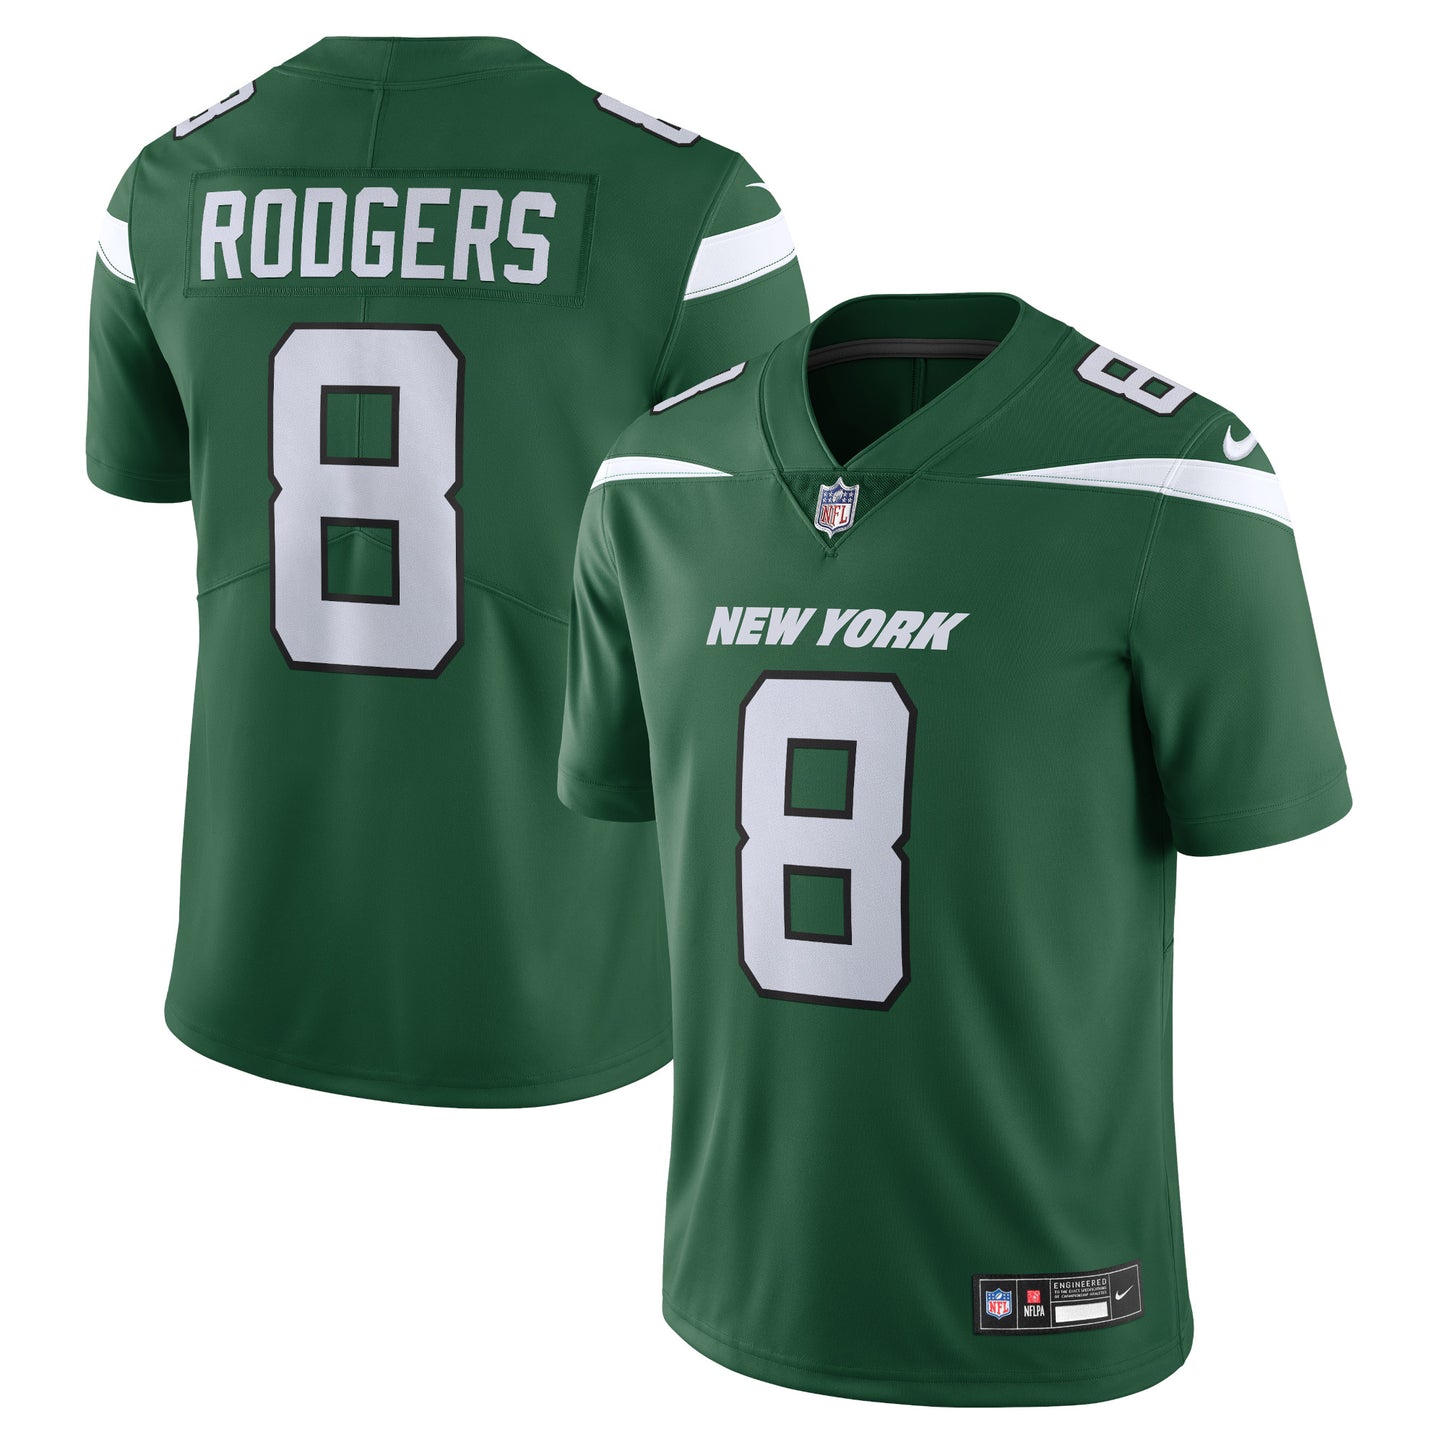 Aaron Rodgers New York Jets Nike Vapor Untouchable Limited Jersey - Gotham Green